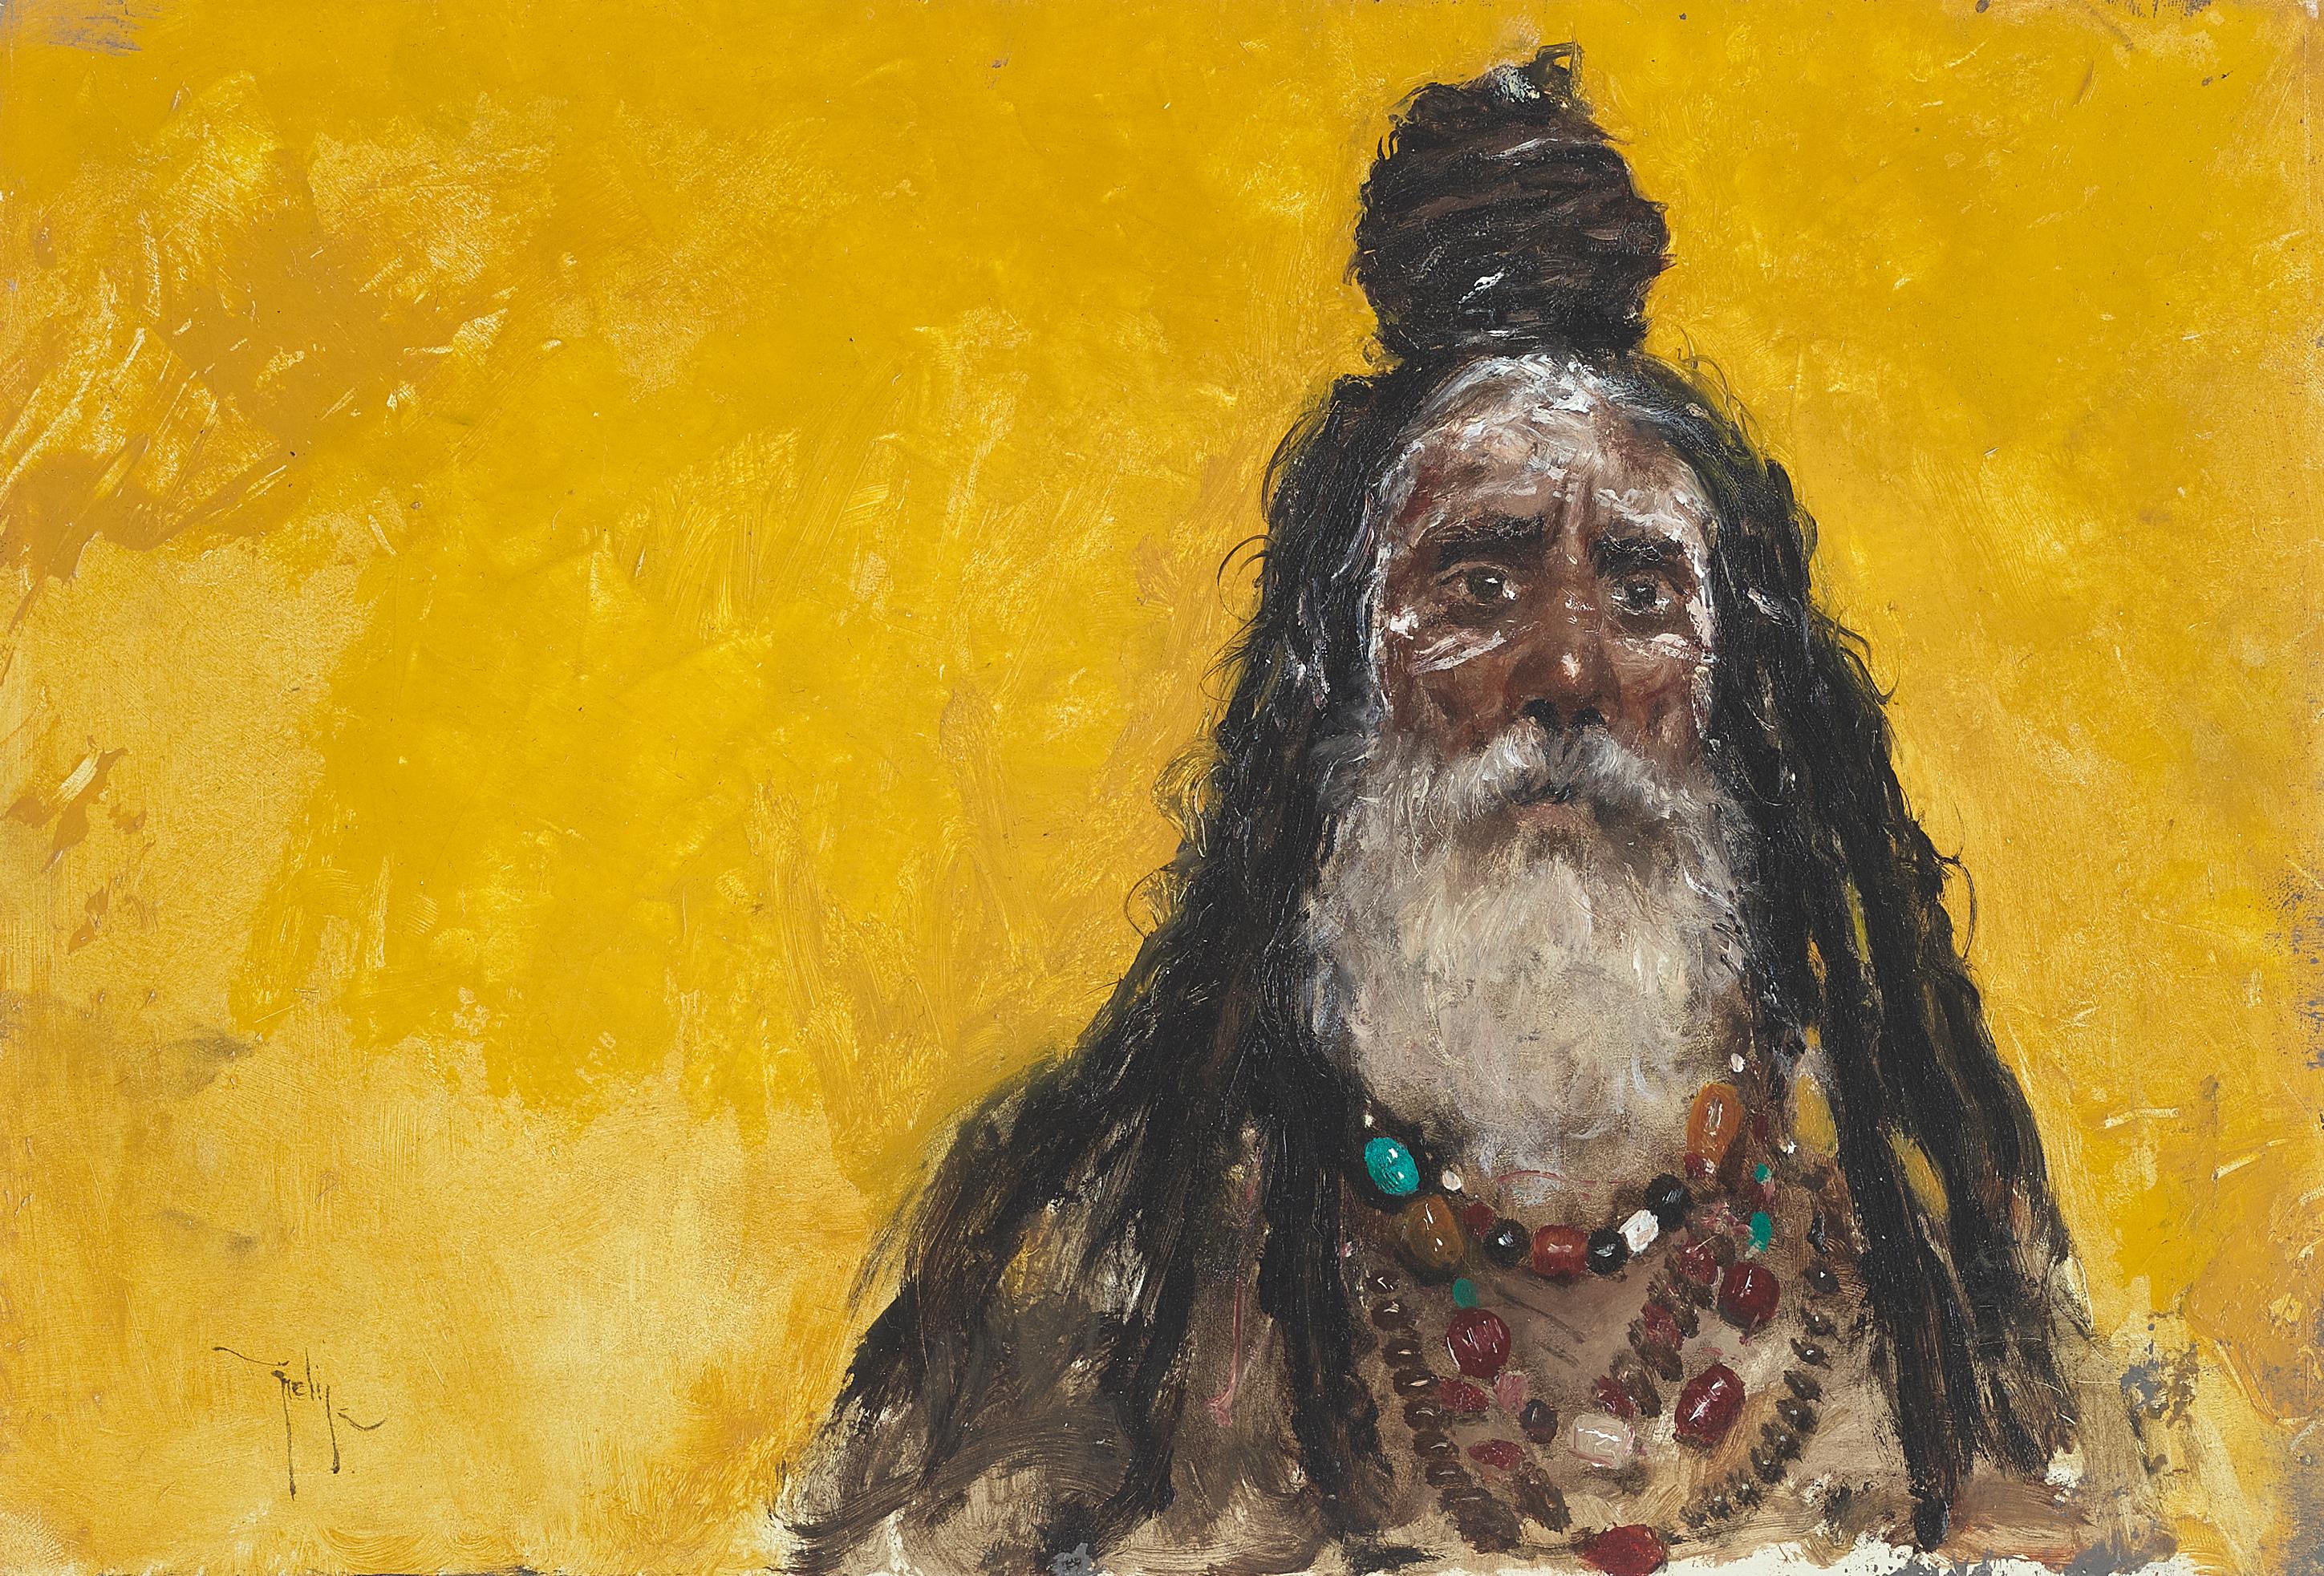 'The Golden Man' Gold & Yellow Figurative Portrait of a Tribal Warrior Man 